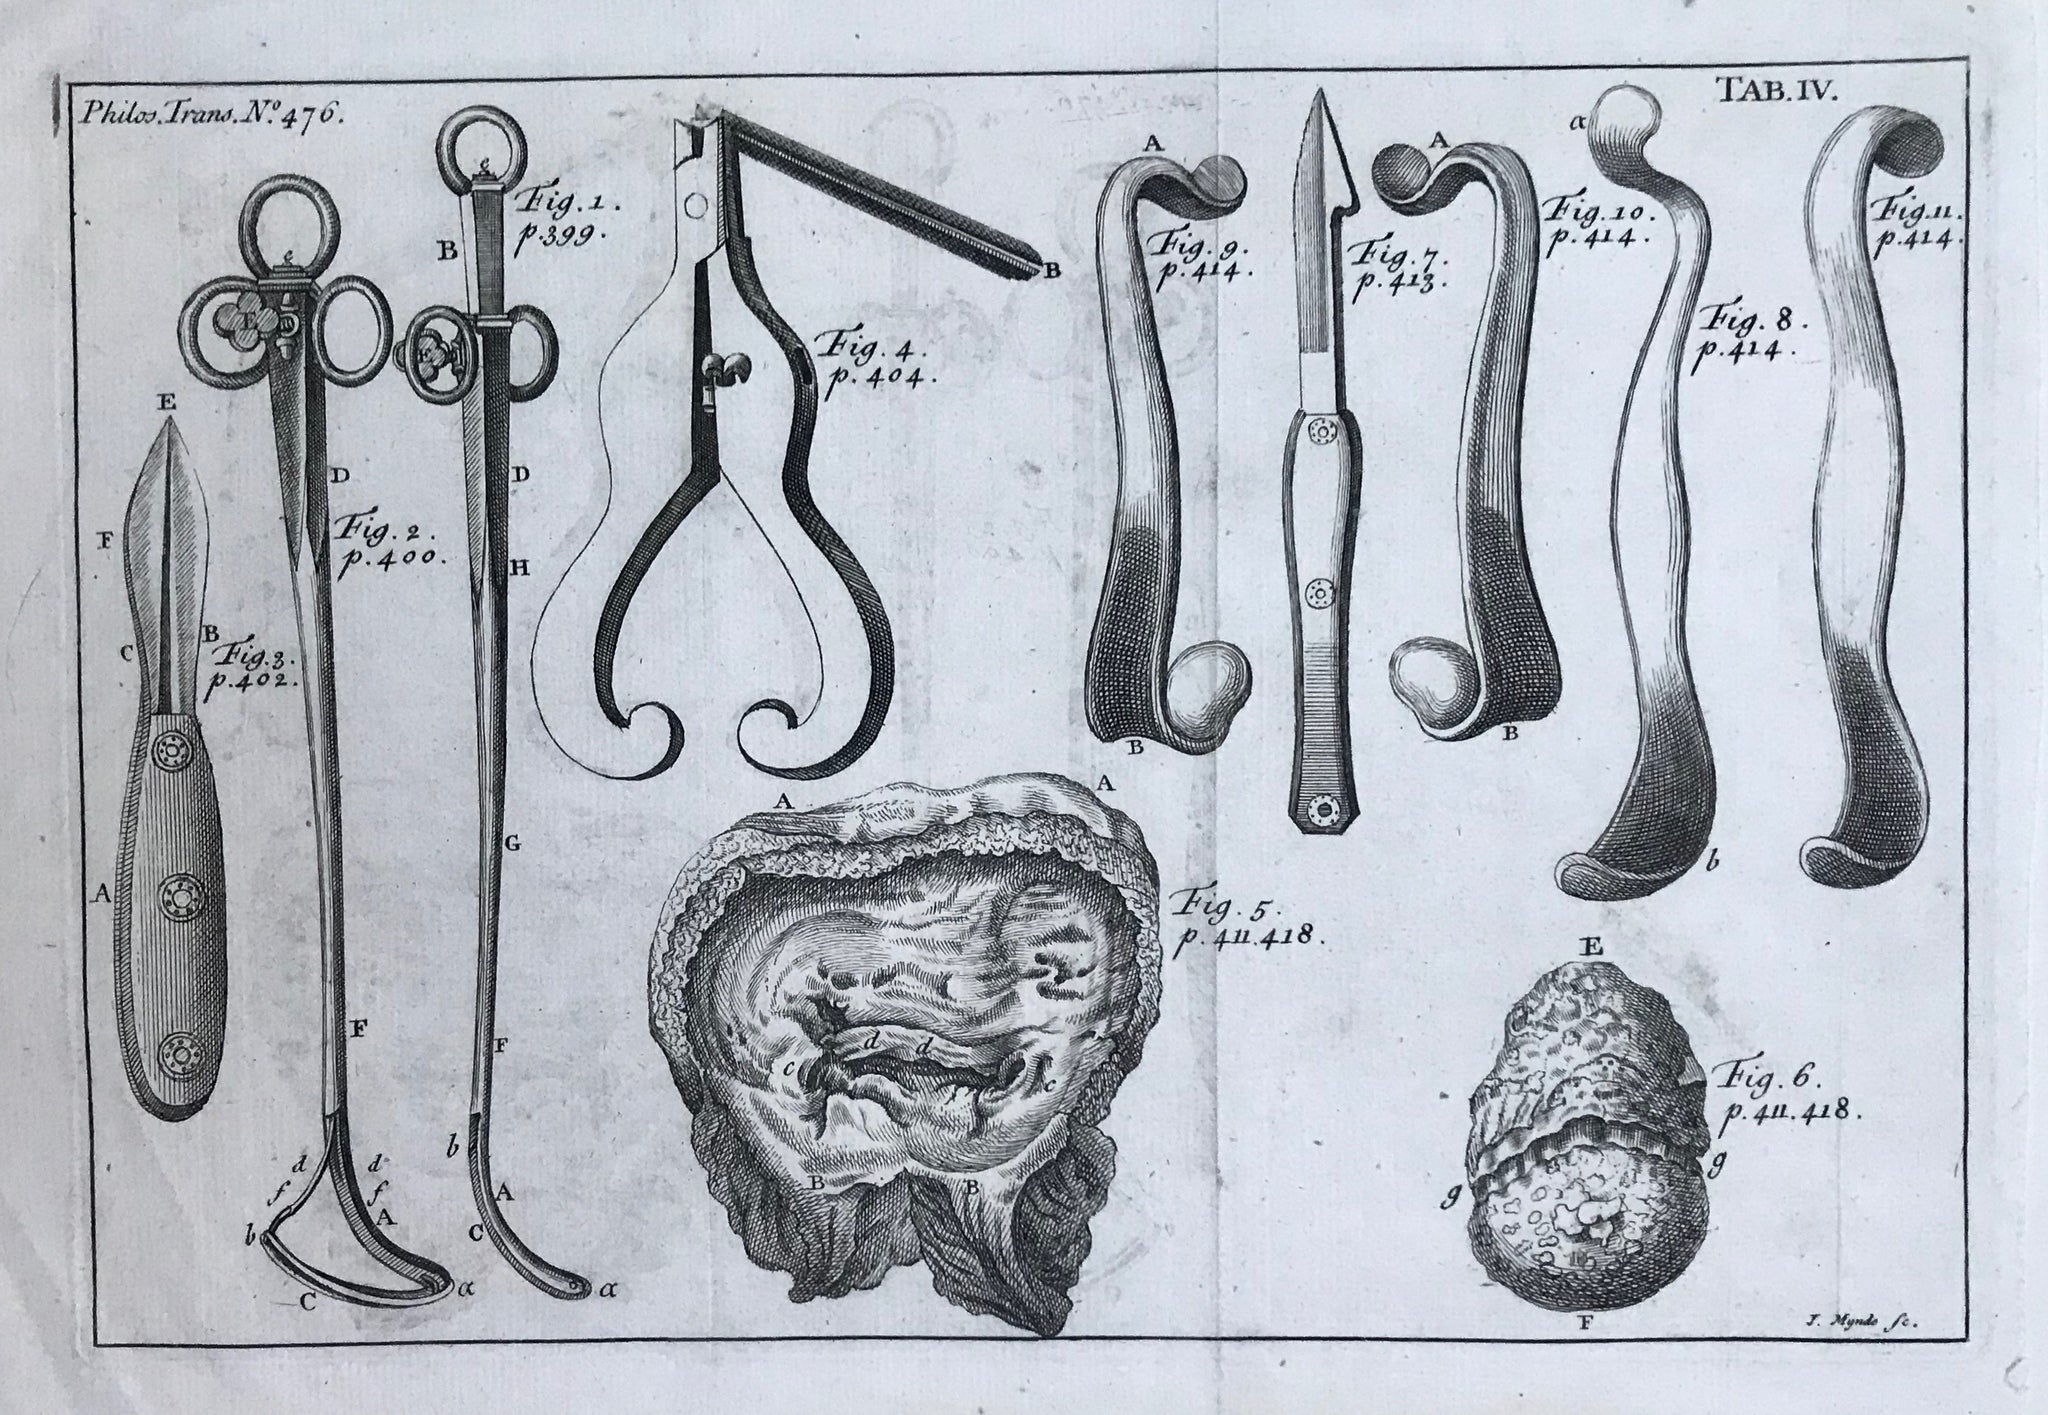 "No Title" (Gynecological instruments)  Copperplate engraving ca 1770. Vertical fold to fit book size. Very minor signs of age and use.